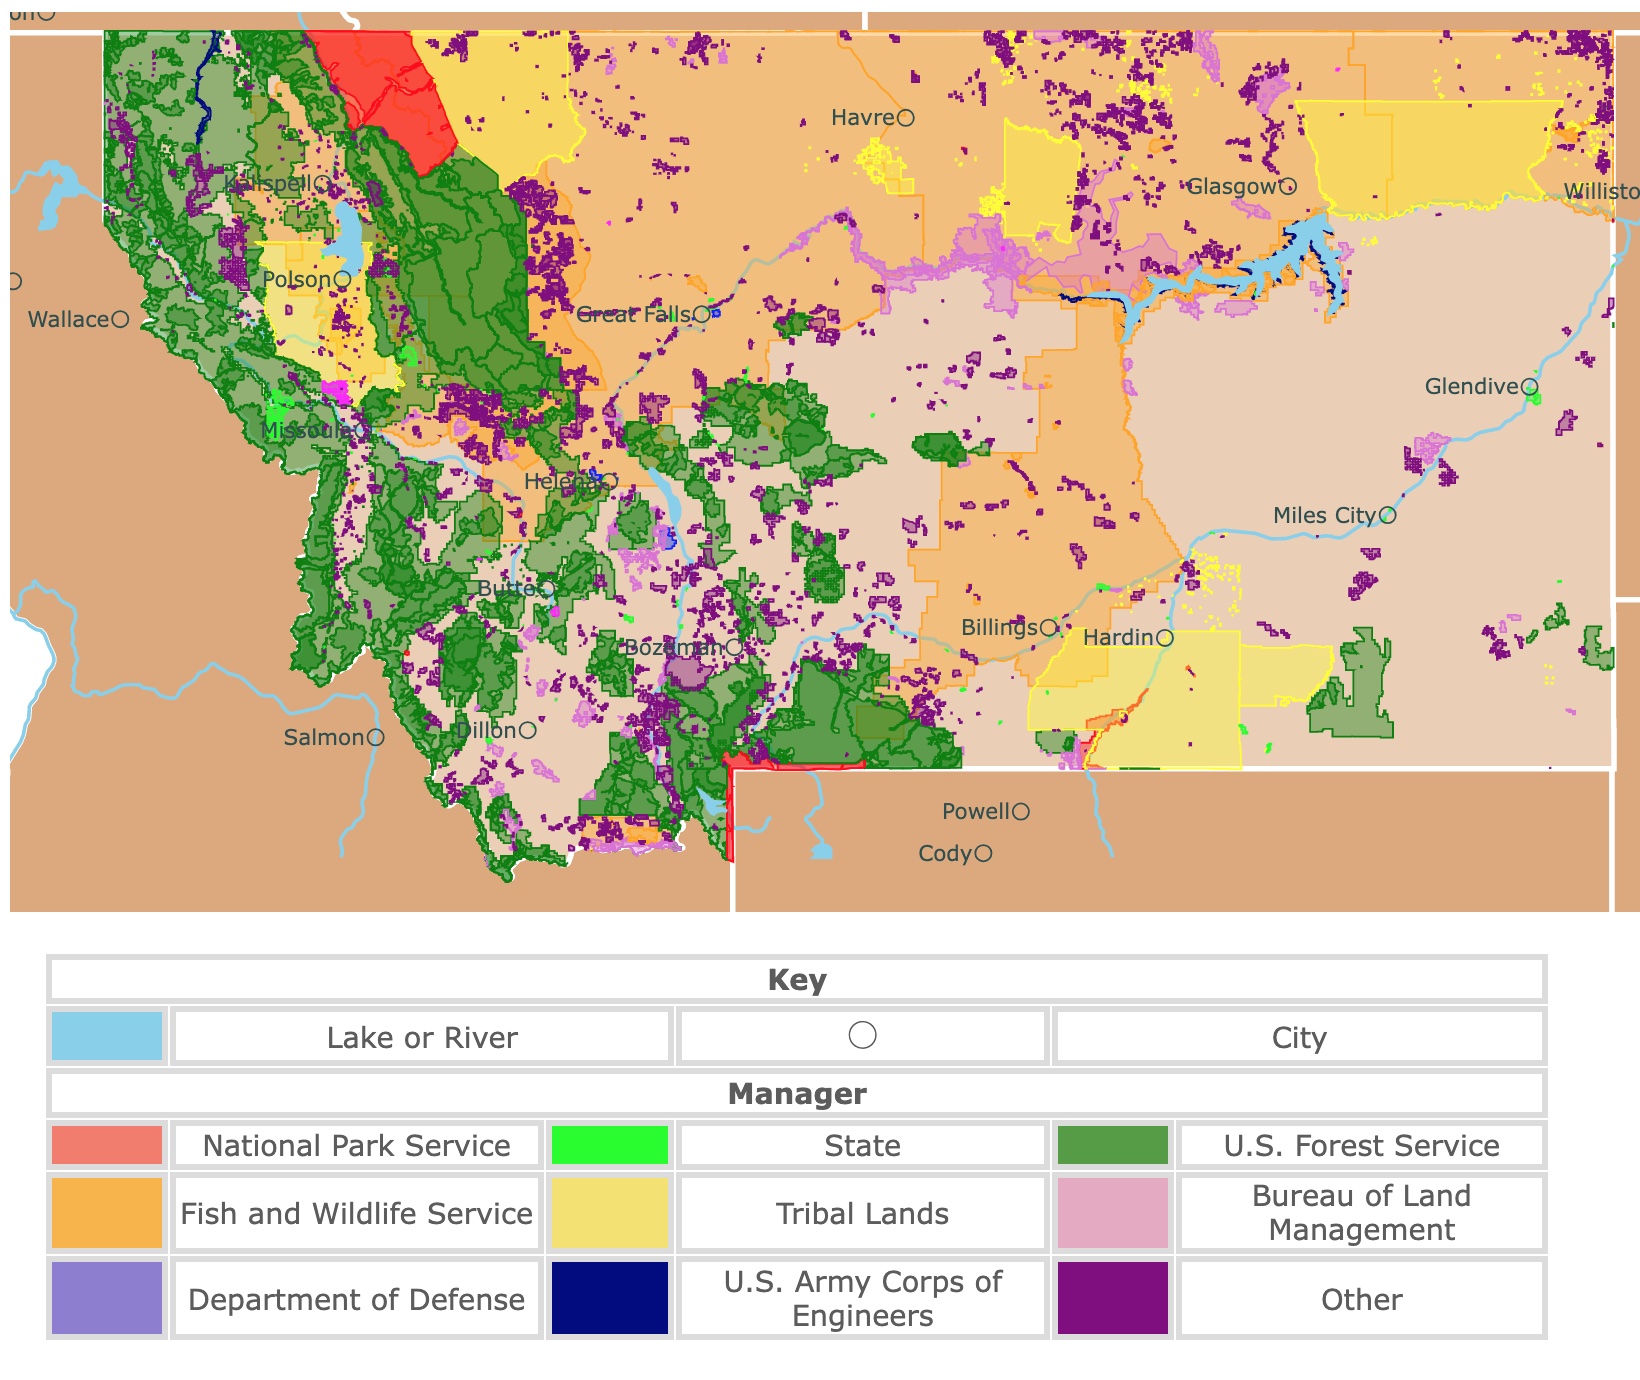 Map of Montana's state parks, national parks, forests, and public lands areas